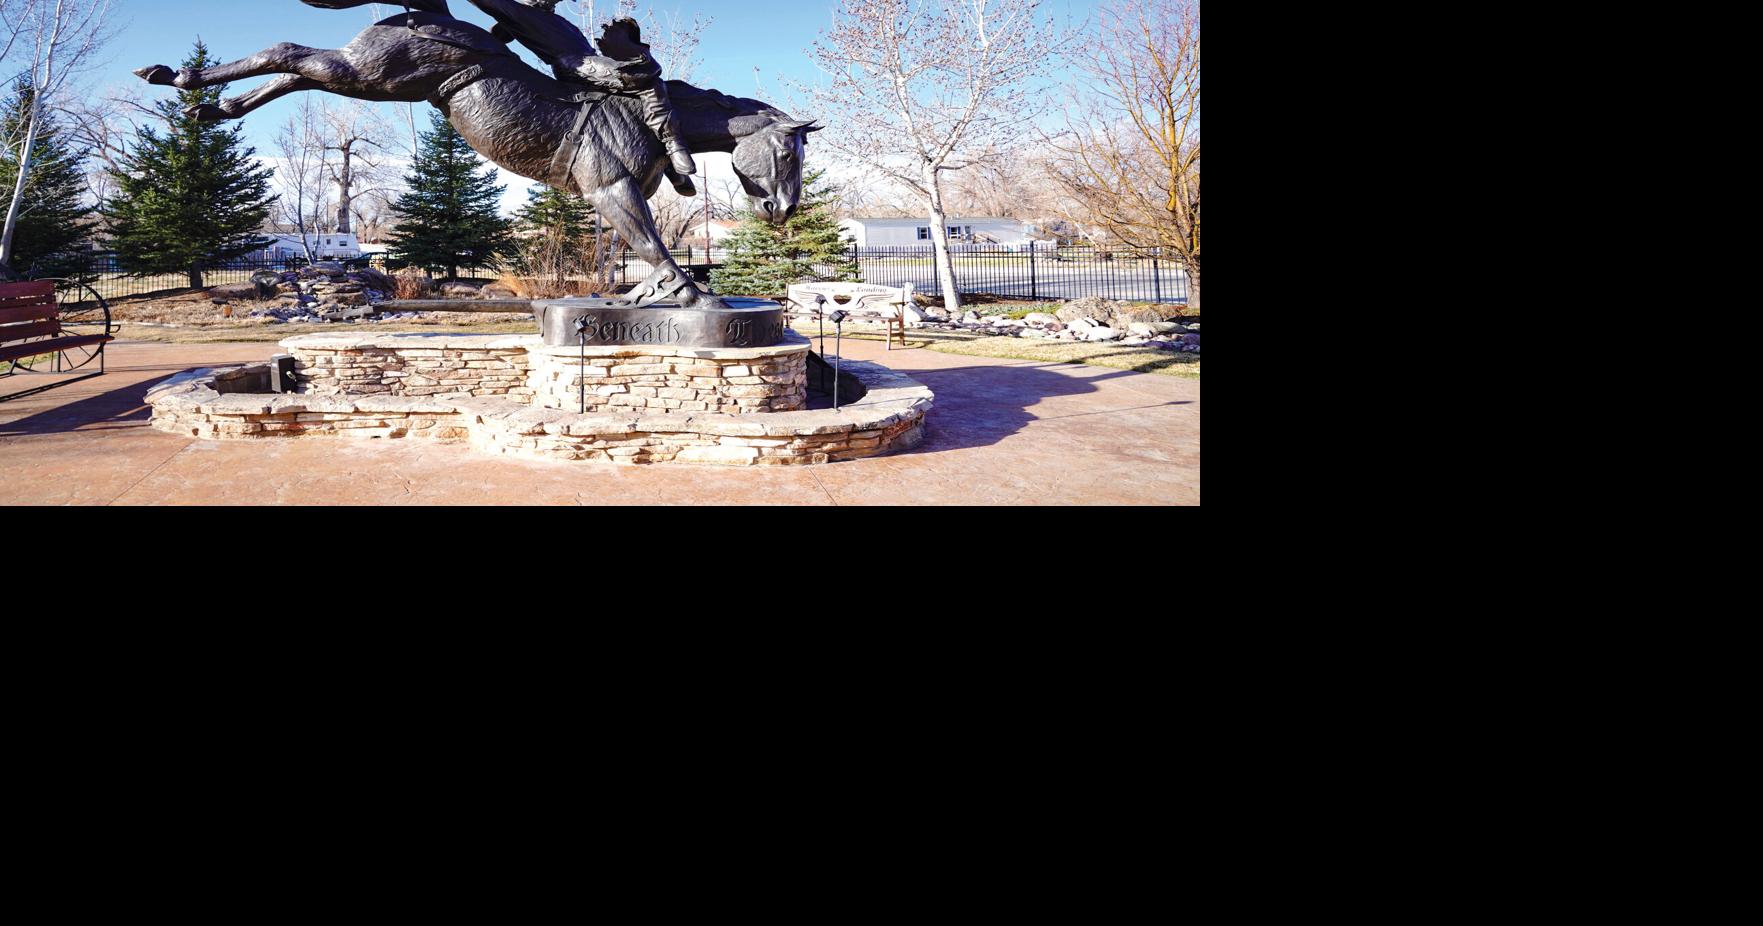 Chris LeDoux’s legacy lives on near his northeastern Wyoming home